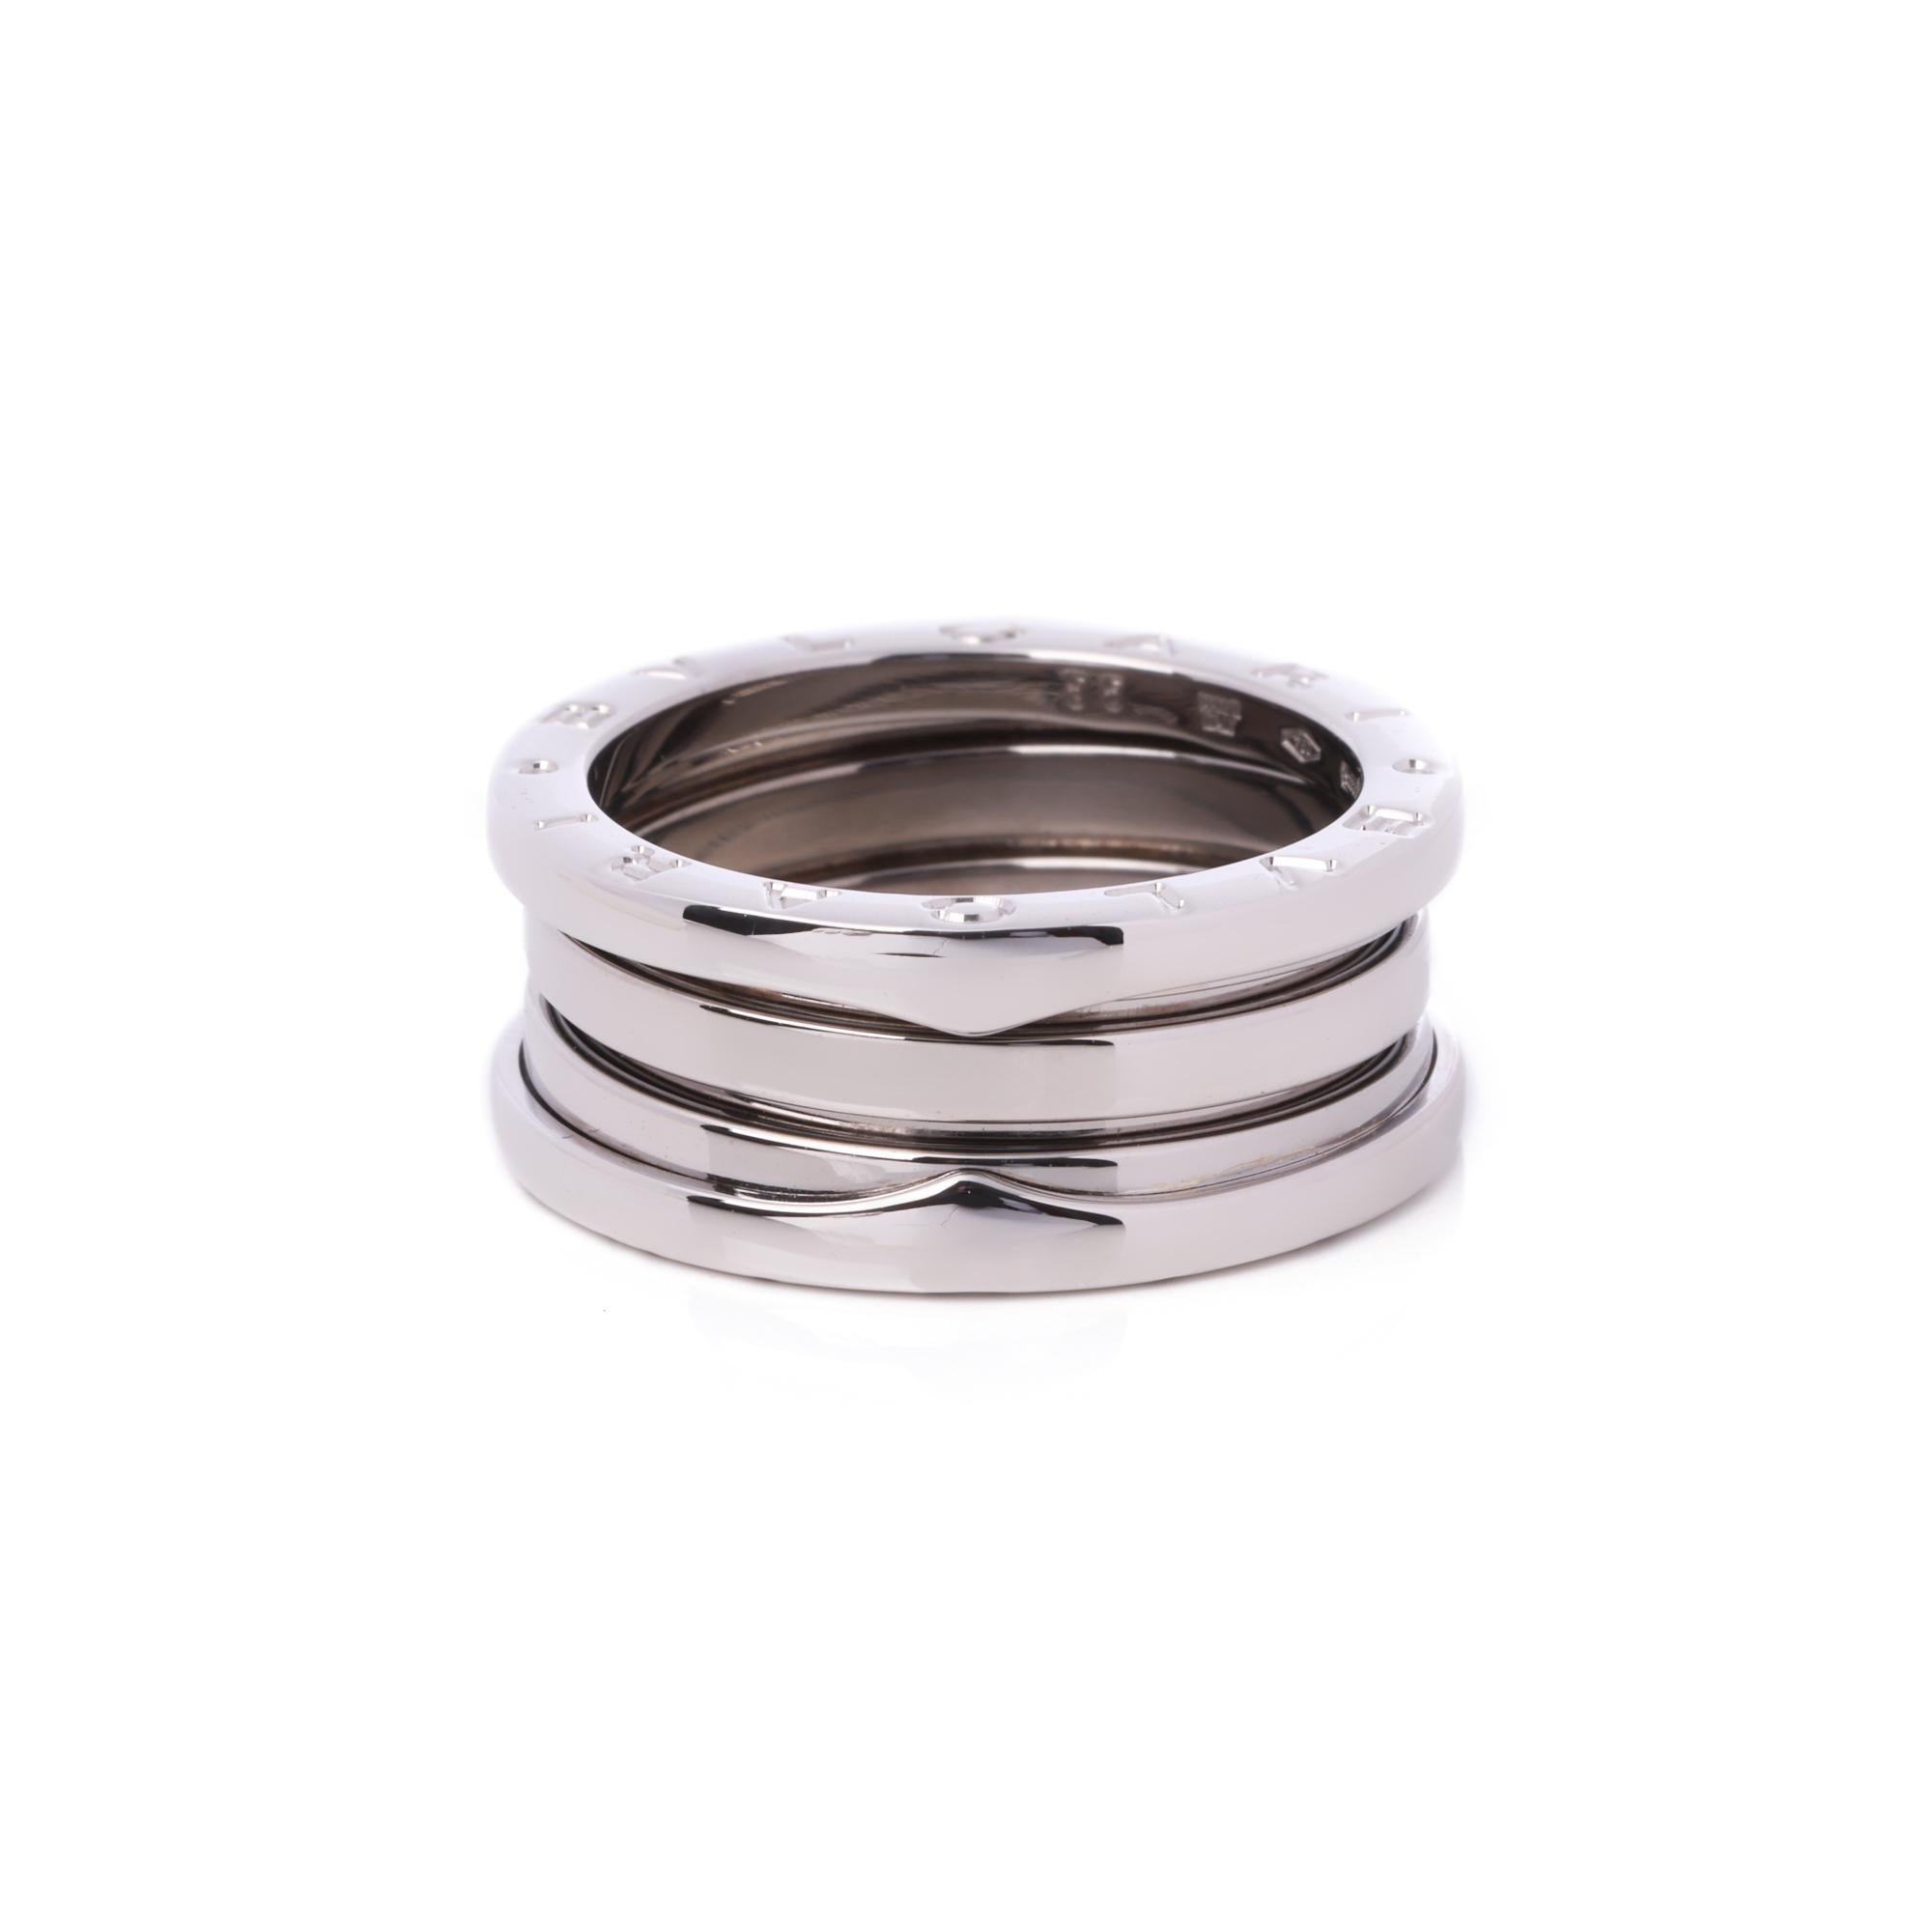 This ring by Bulgari is from their B Zero 1 collection and features a distinctive three band spiral design in 18ct white gold. Complete with a Xupes presentation box. Our Xupes reference is J776 should you need to quote this. UK ring size O, EU ring